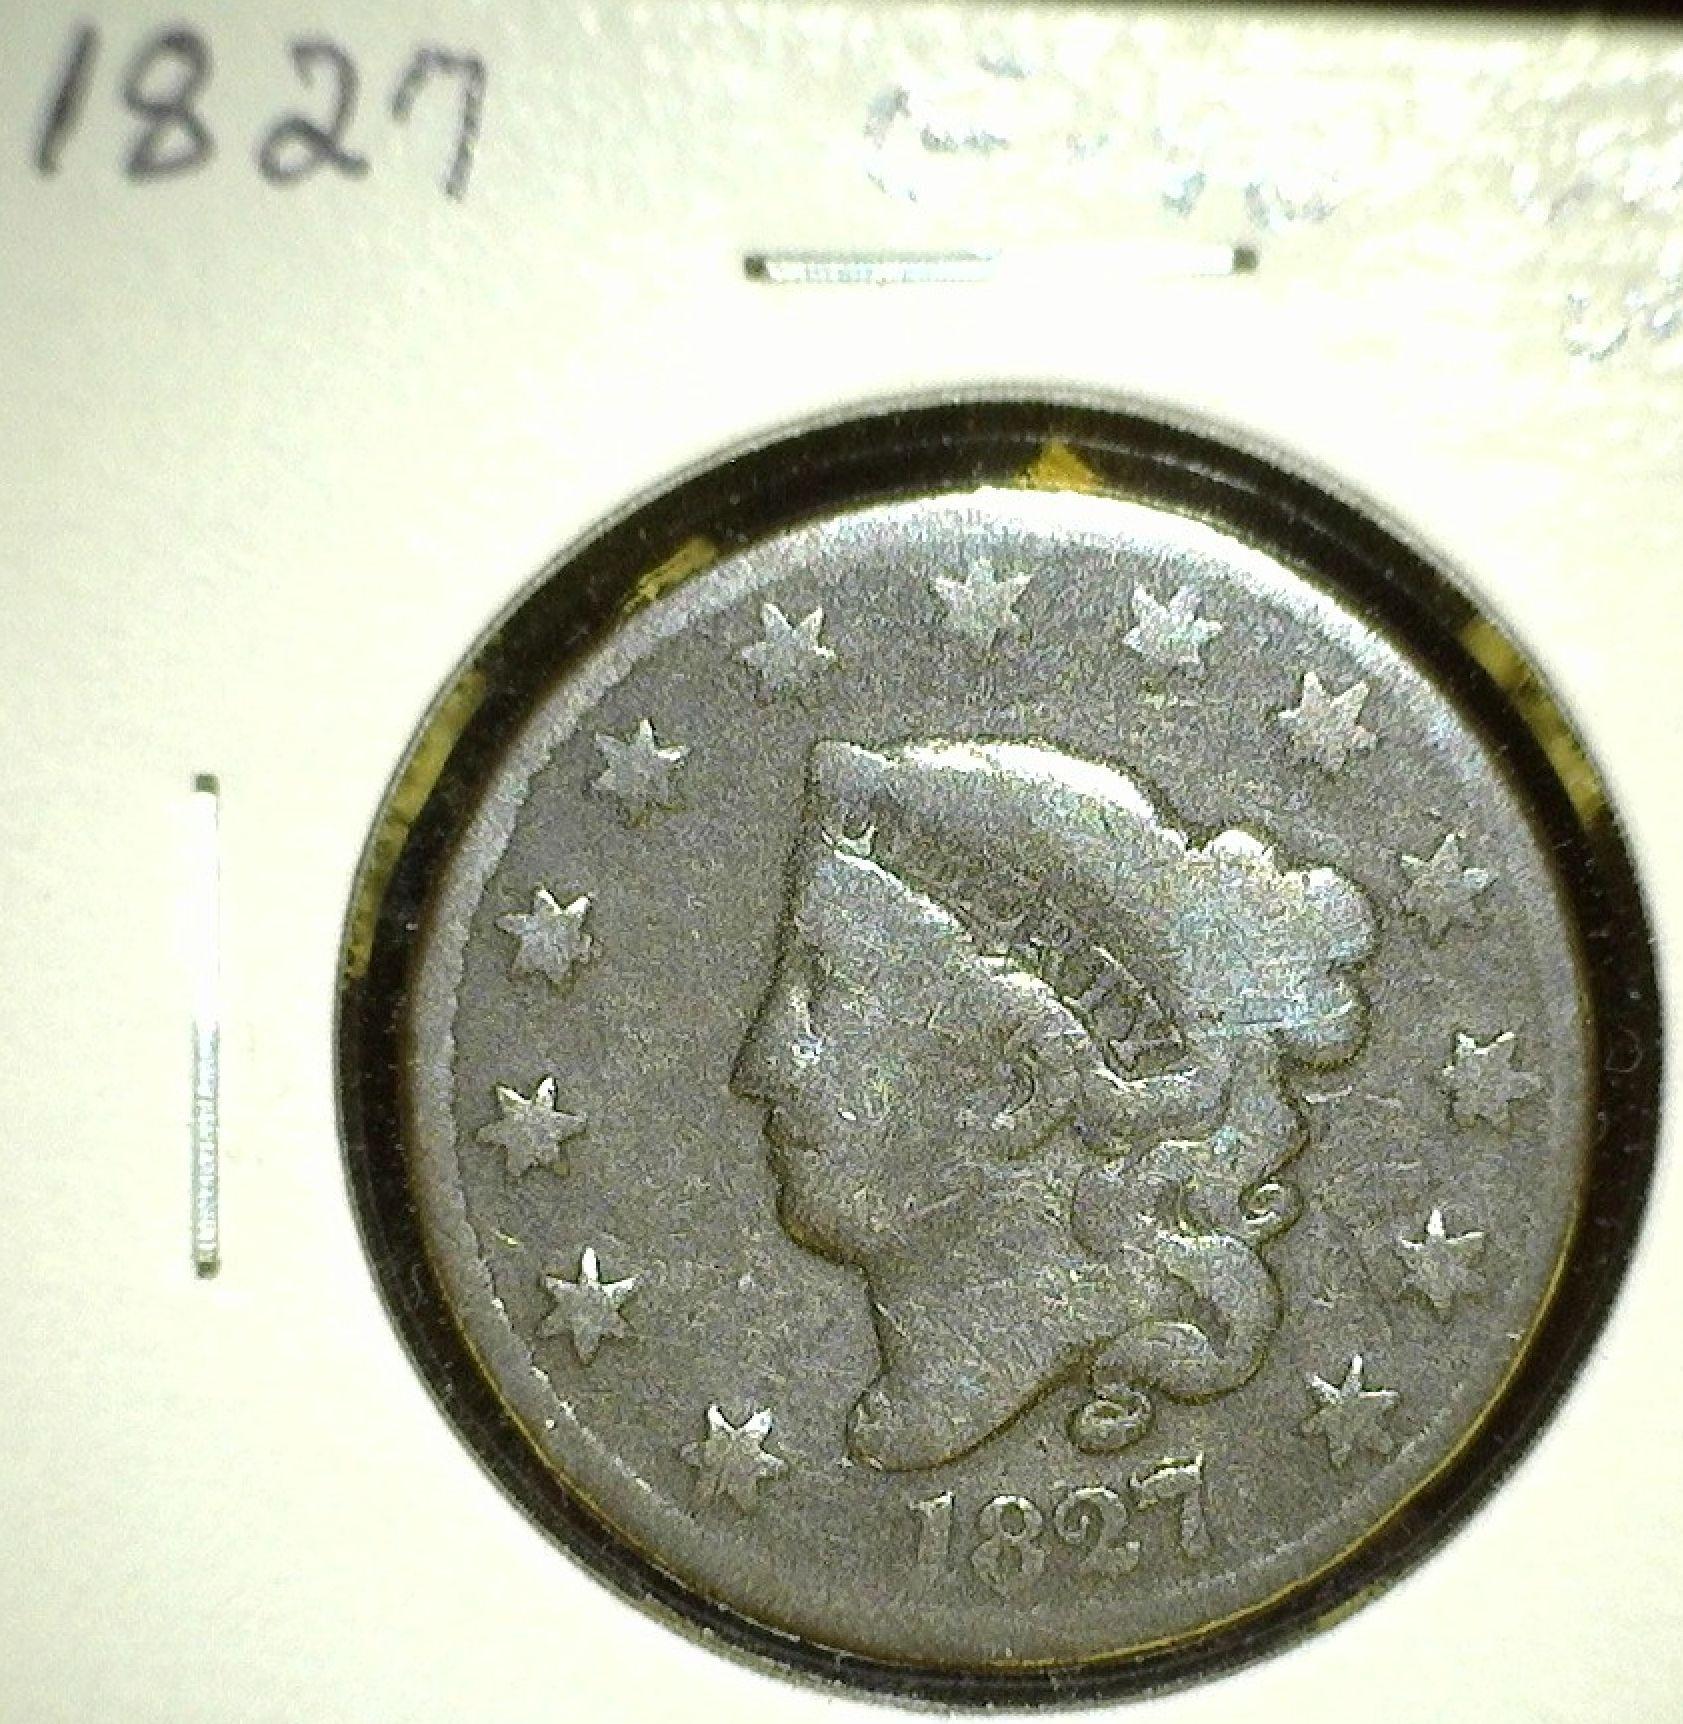 (4) U.S.Large Cents: 1820 VG with edge ding at 1:00; 1822 Good with reverse corrosion; 1827 G-VG wit